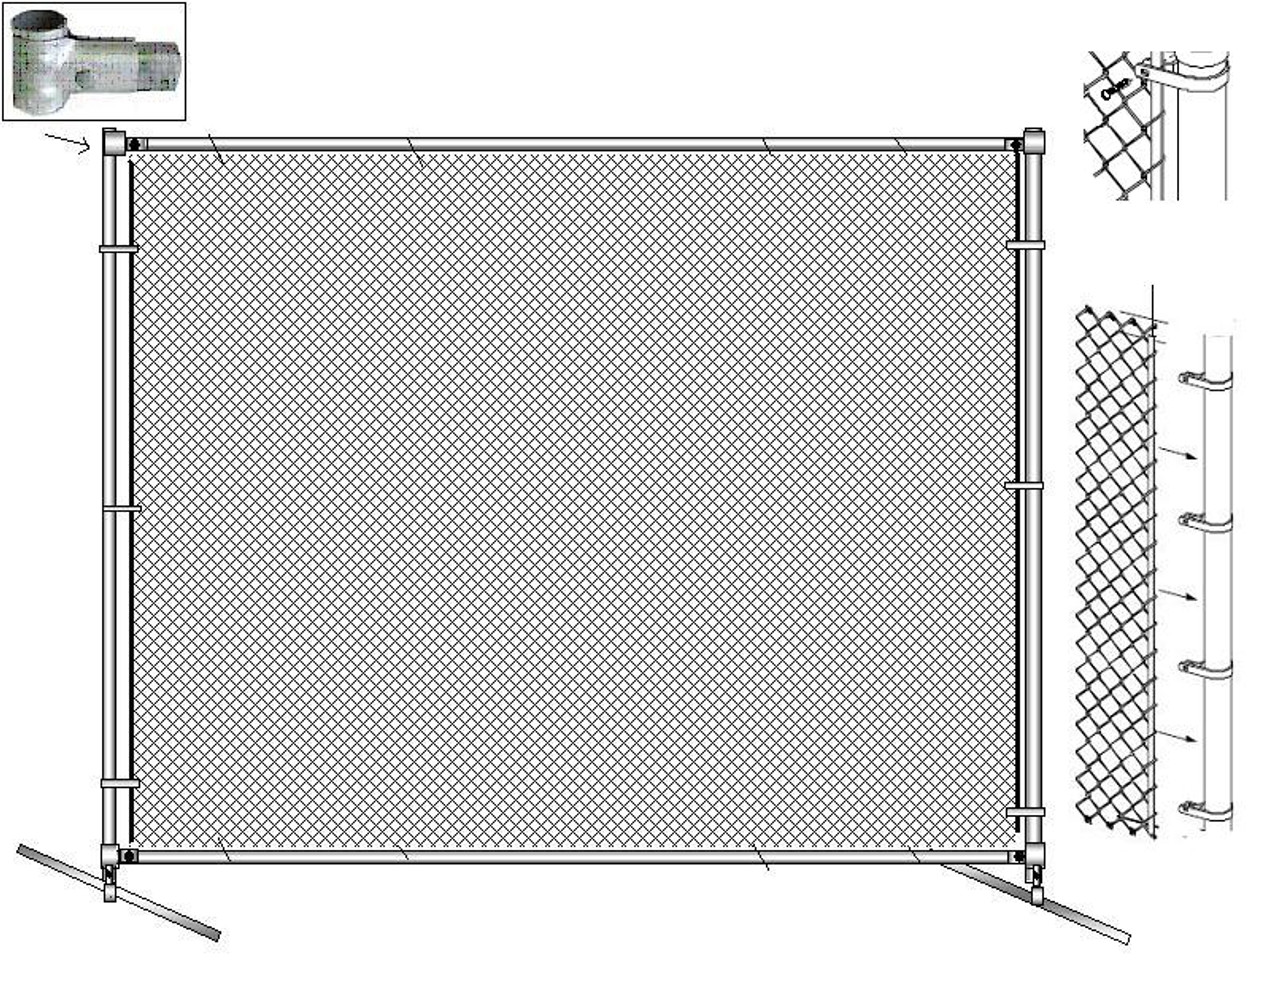 Black Chain Link Fence Sports Panel Kit 6High x 10ft Wide Panel - Portable Panel Component Kit, SELF ASSEMBLY REQUIRED